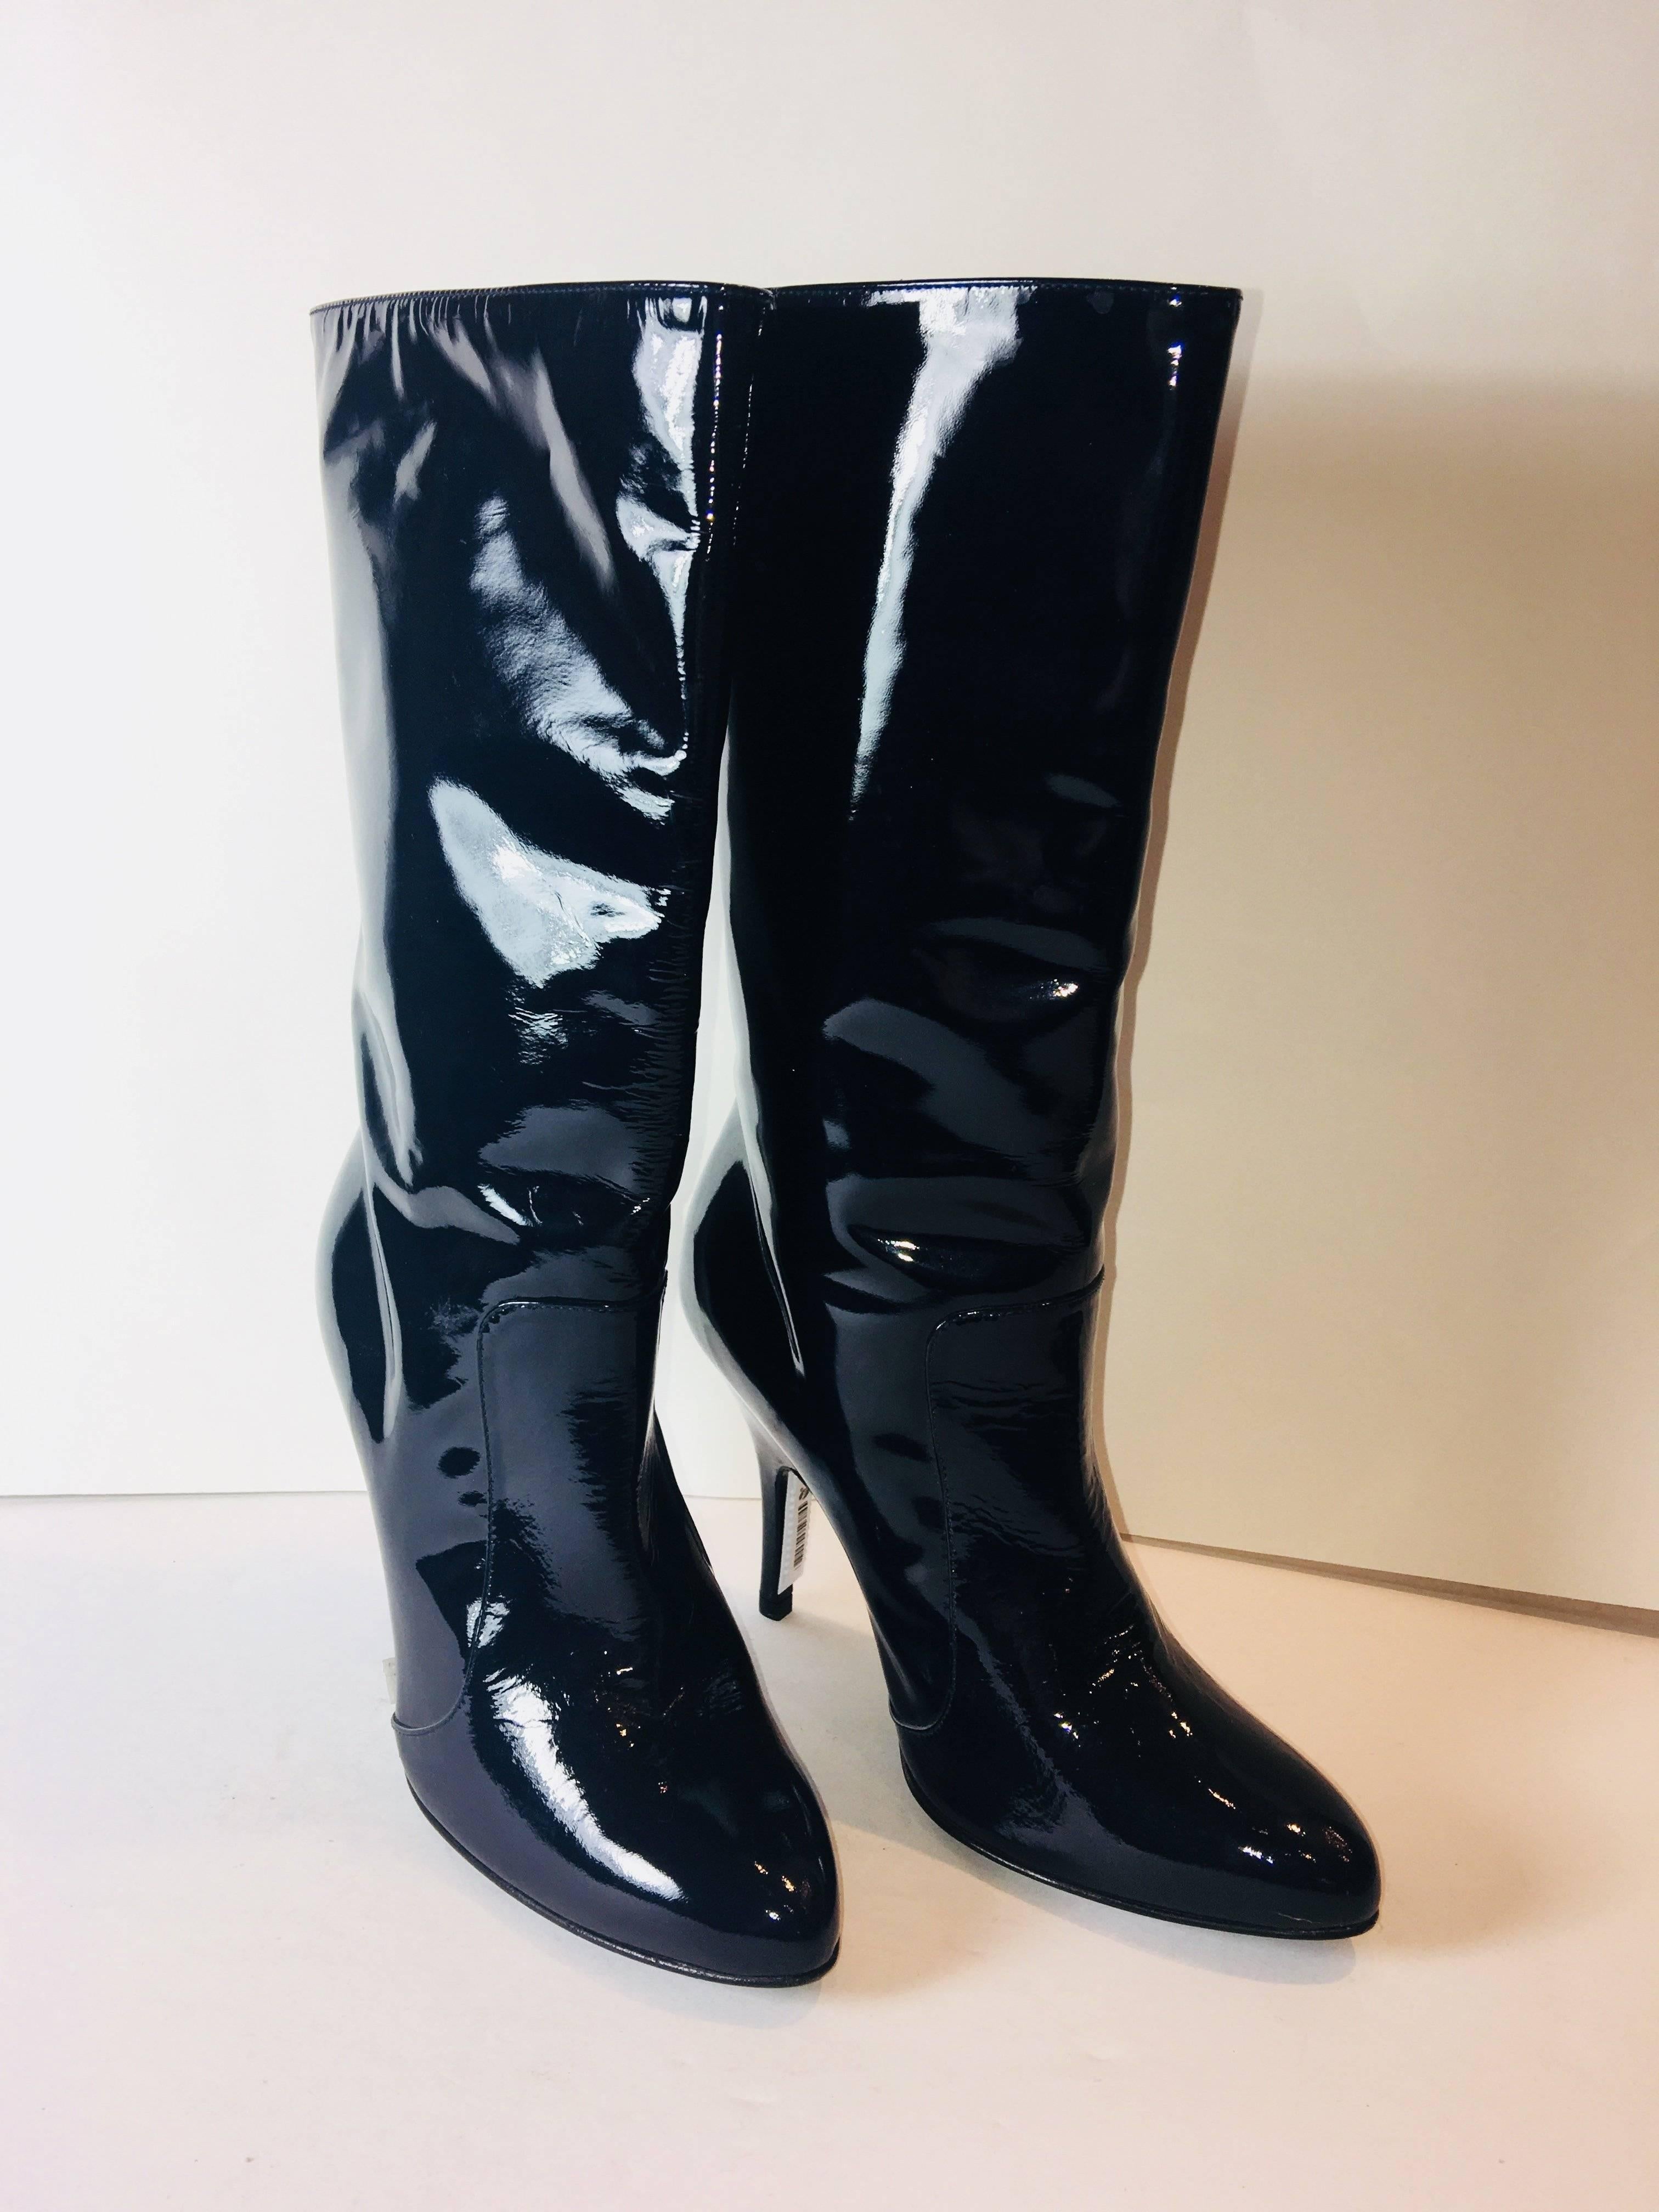 Lanvin Patent Leather Mid Calf Boots with Heel in Navy